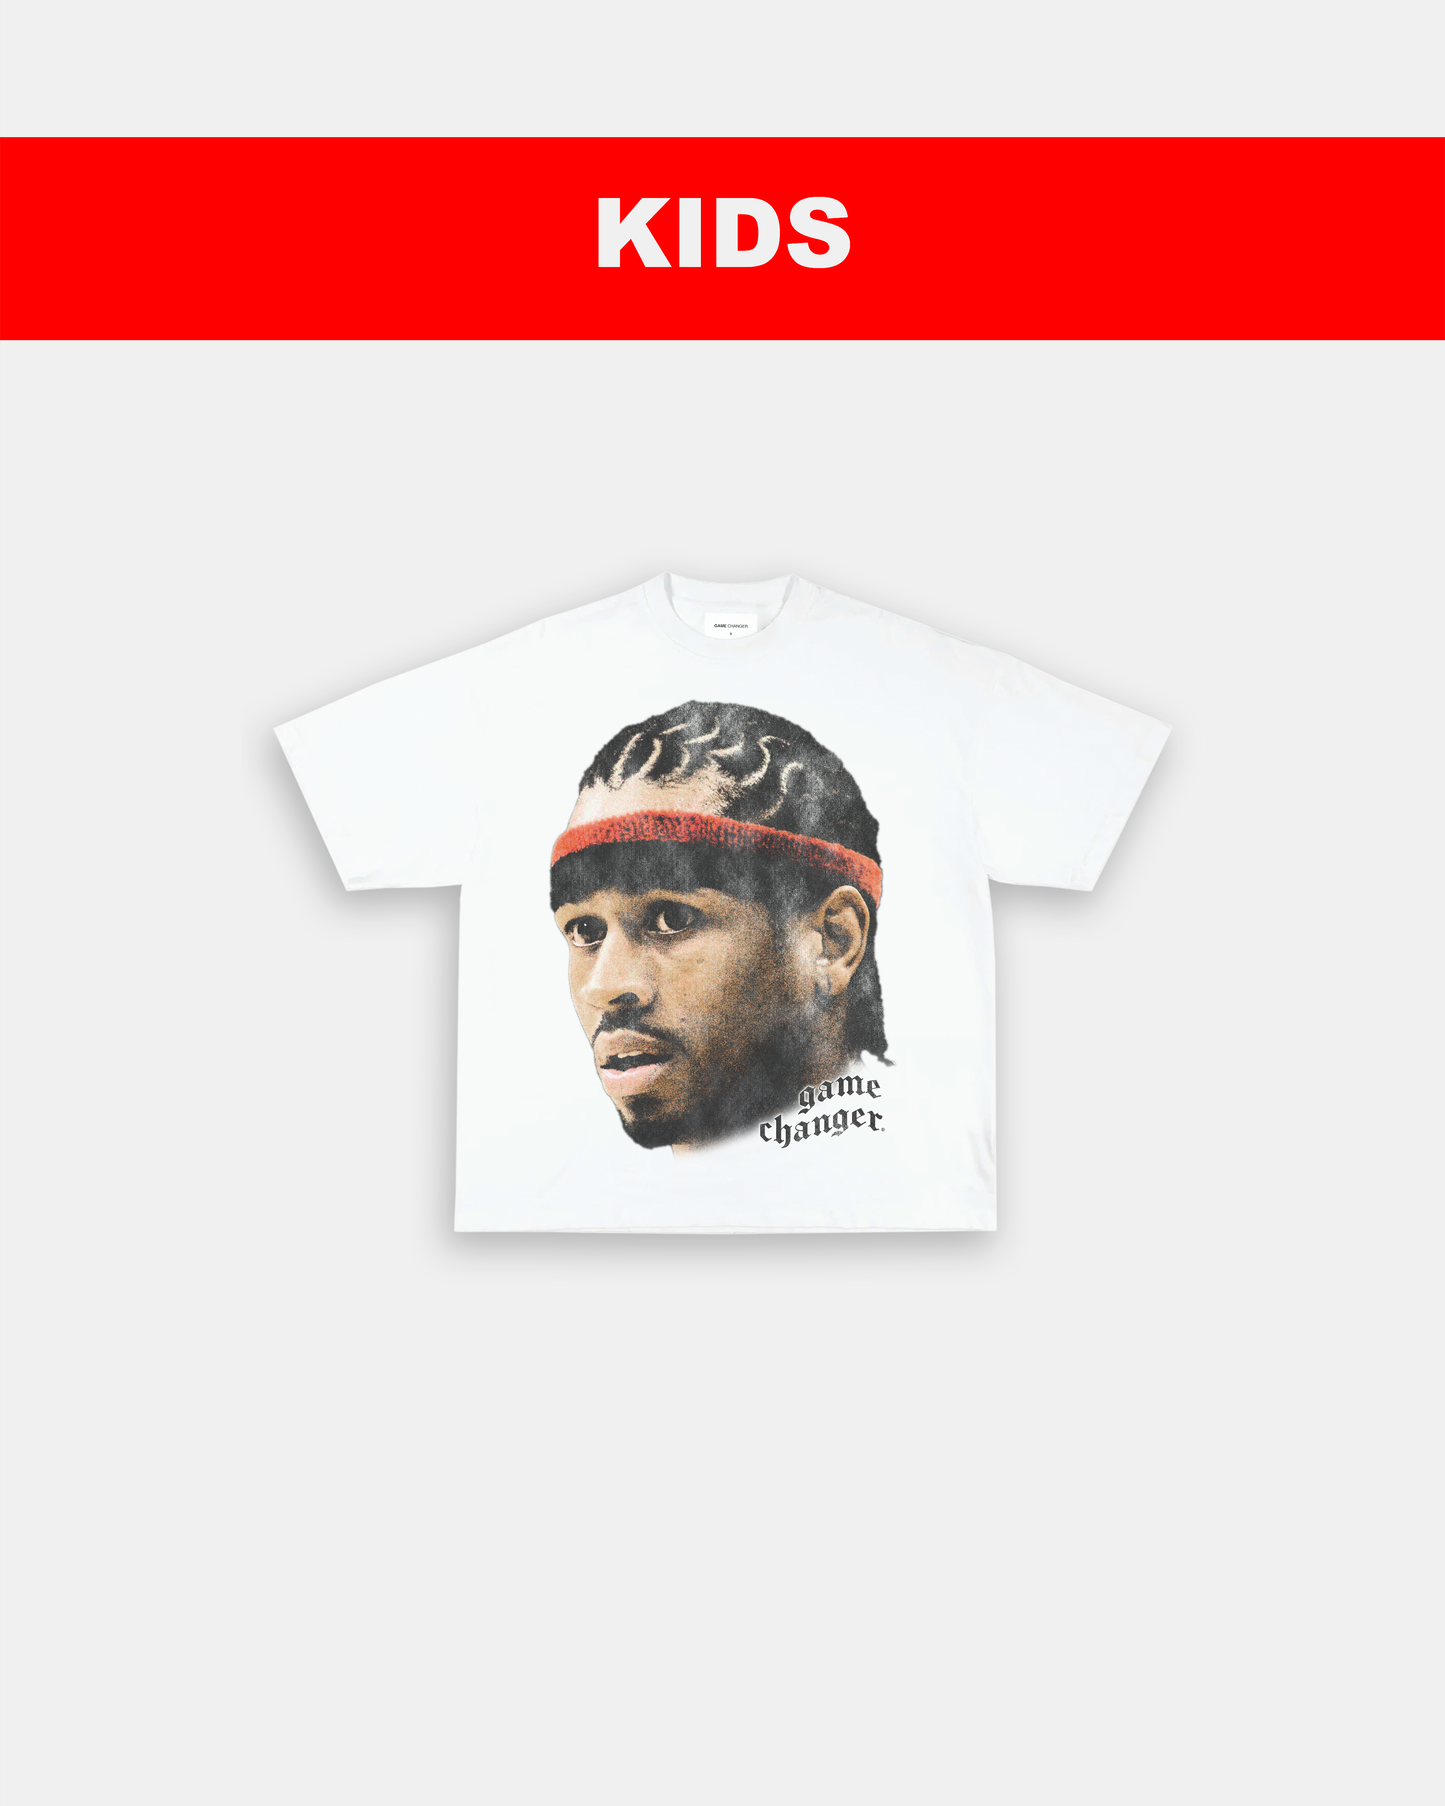 BIG FACE IVERSON - KIDS TEE